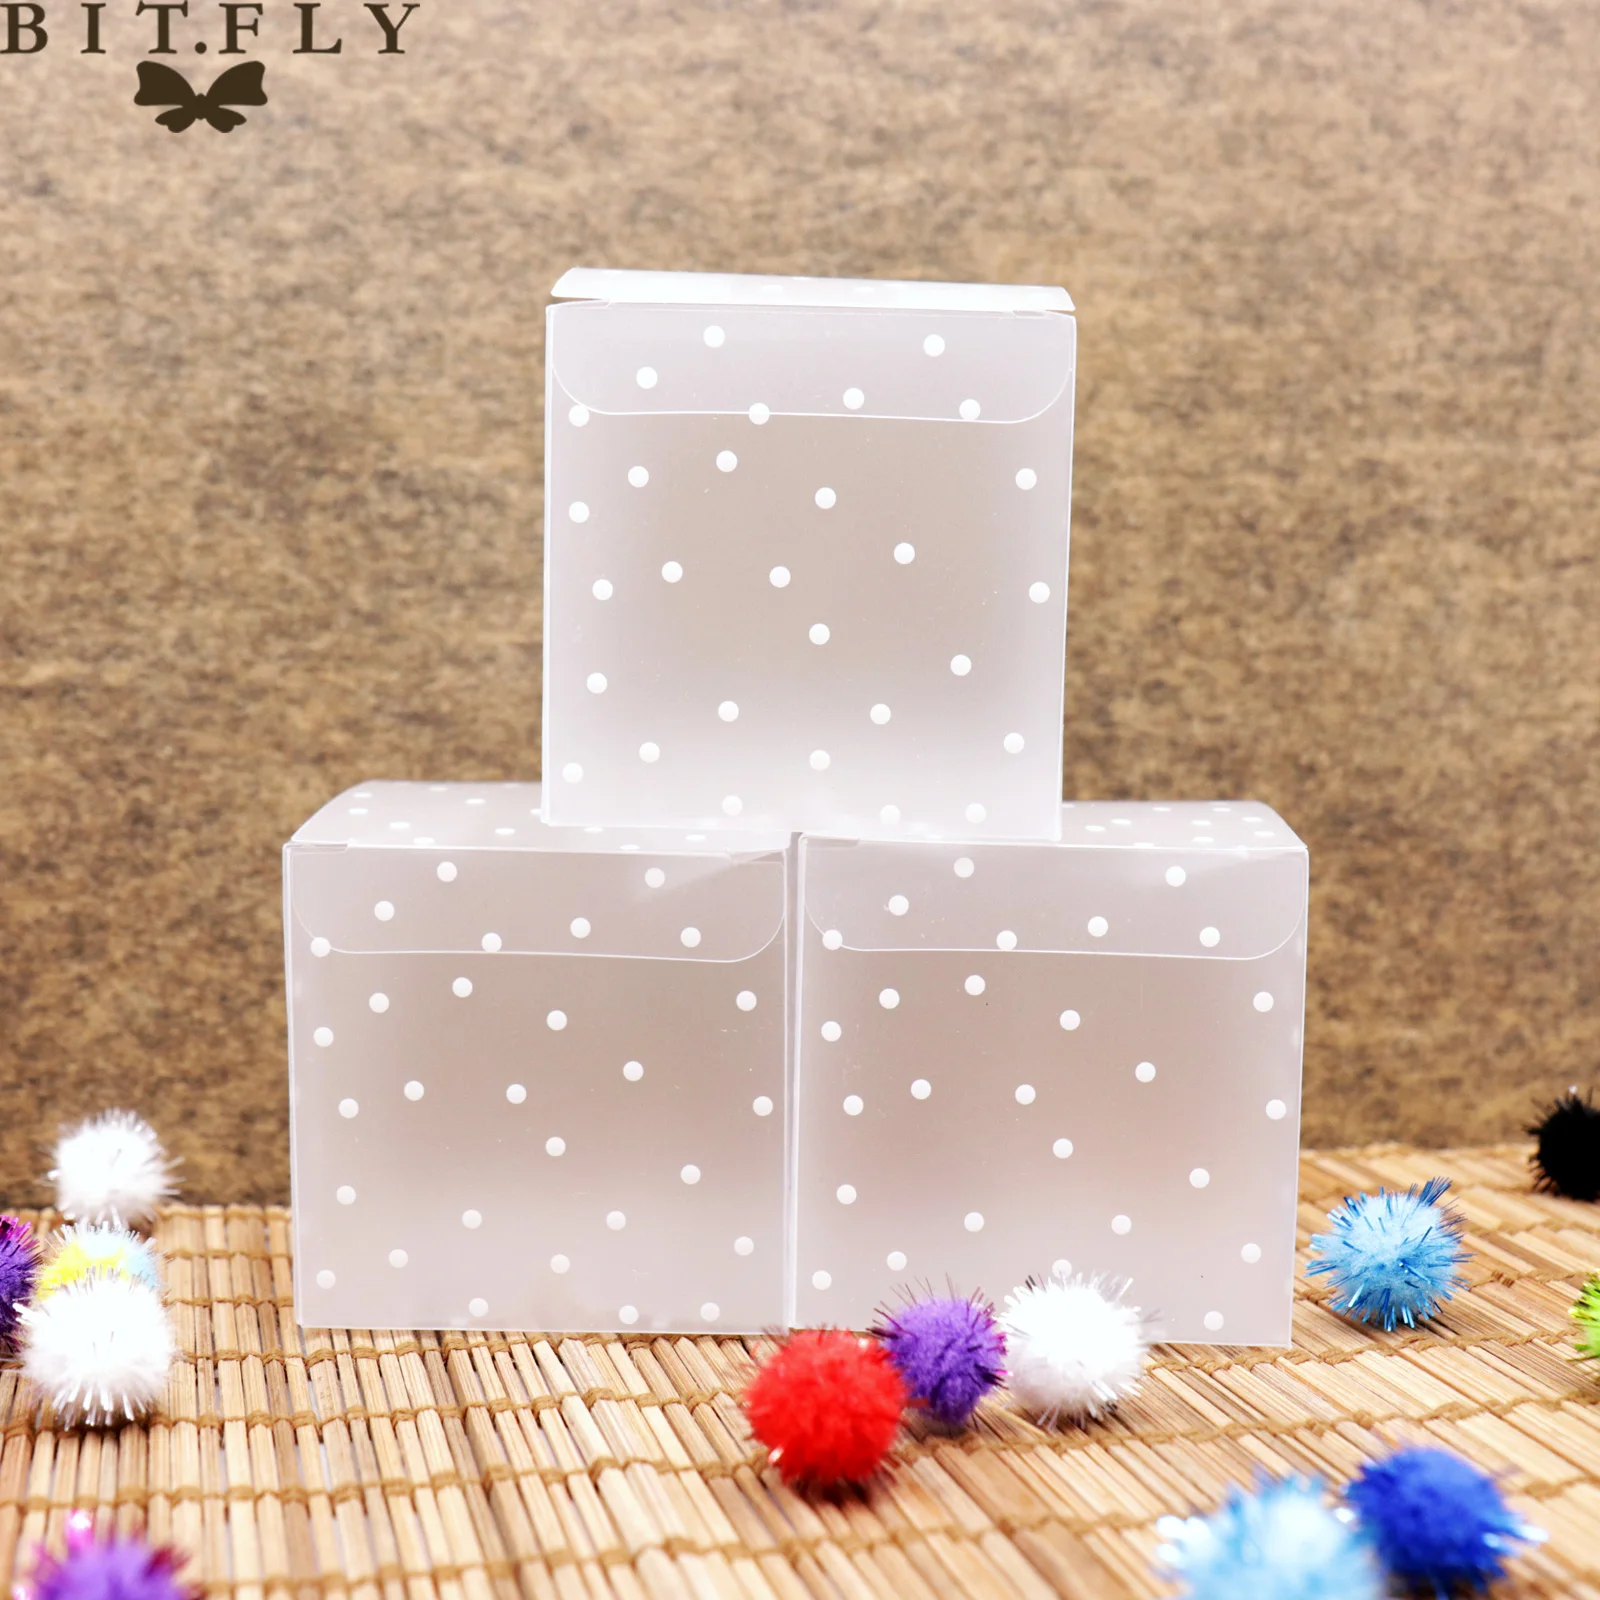 Square Transparent PVC Cube Gifts Candy Boxes Chocolate Favo Wedding K7N6 S D1E2 